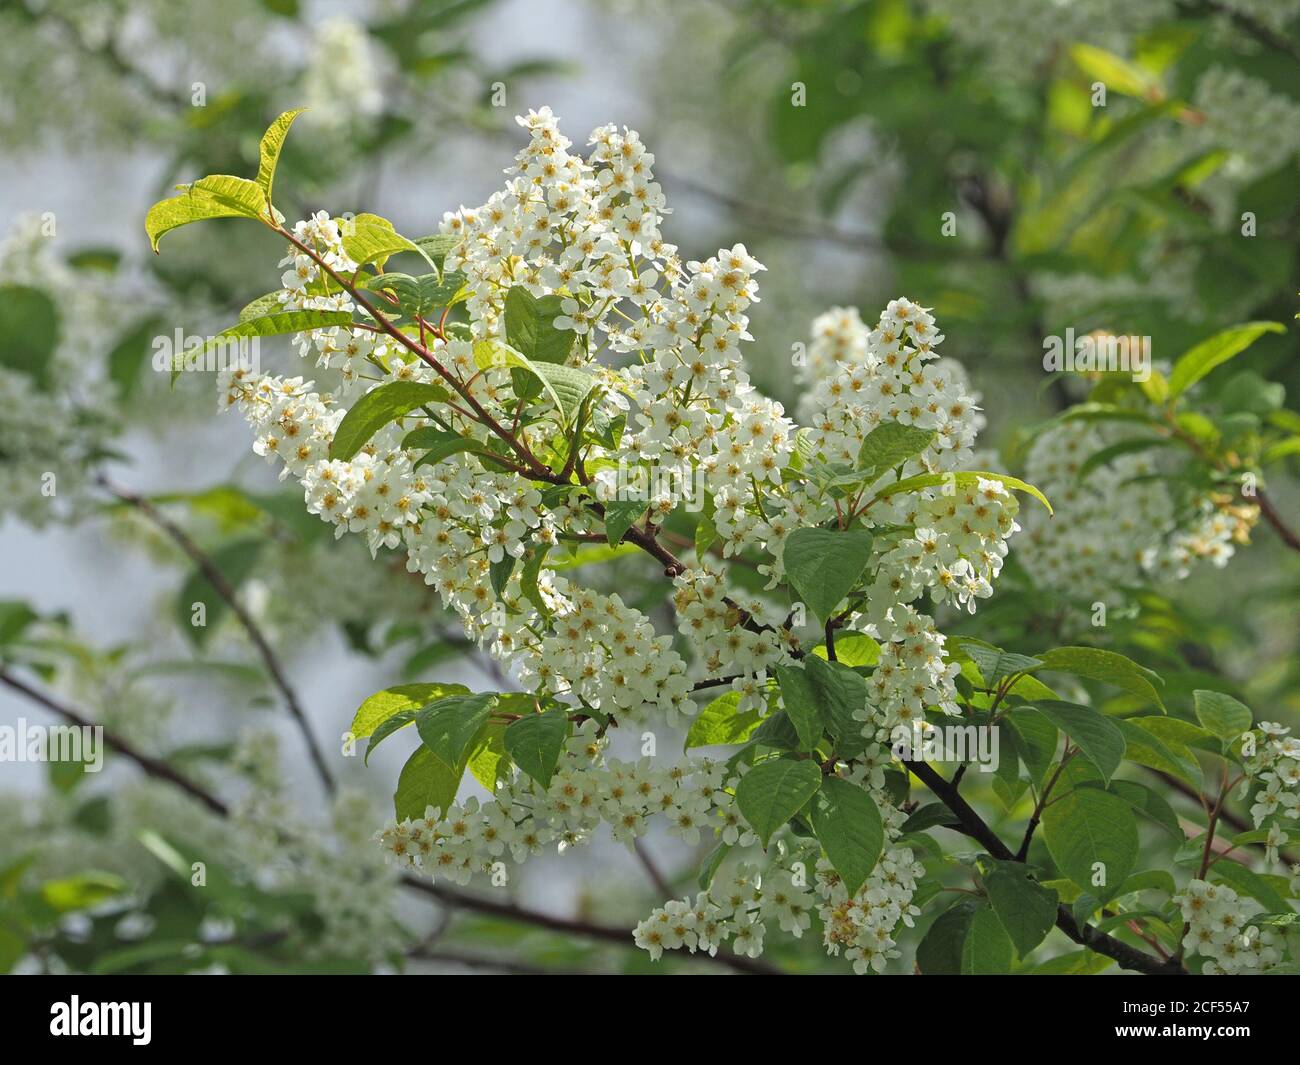 Profuse white panicles of sweet-scented blossom of flowering Bird ...